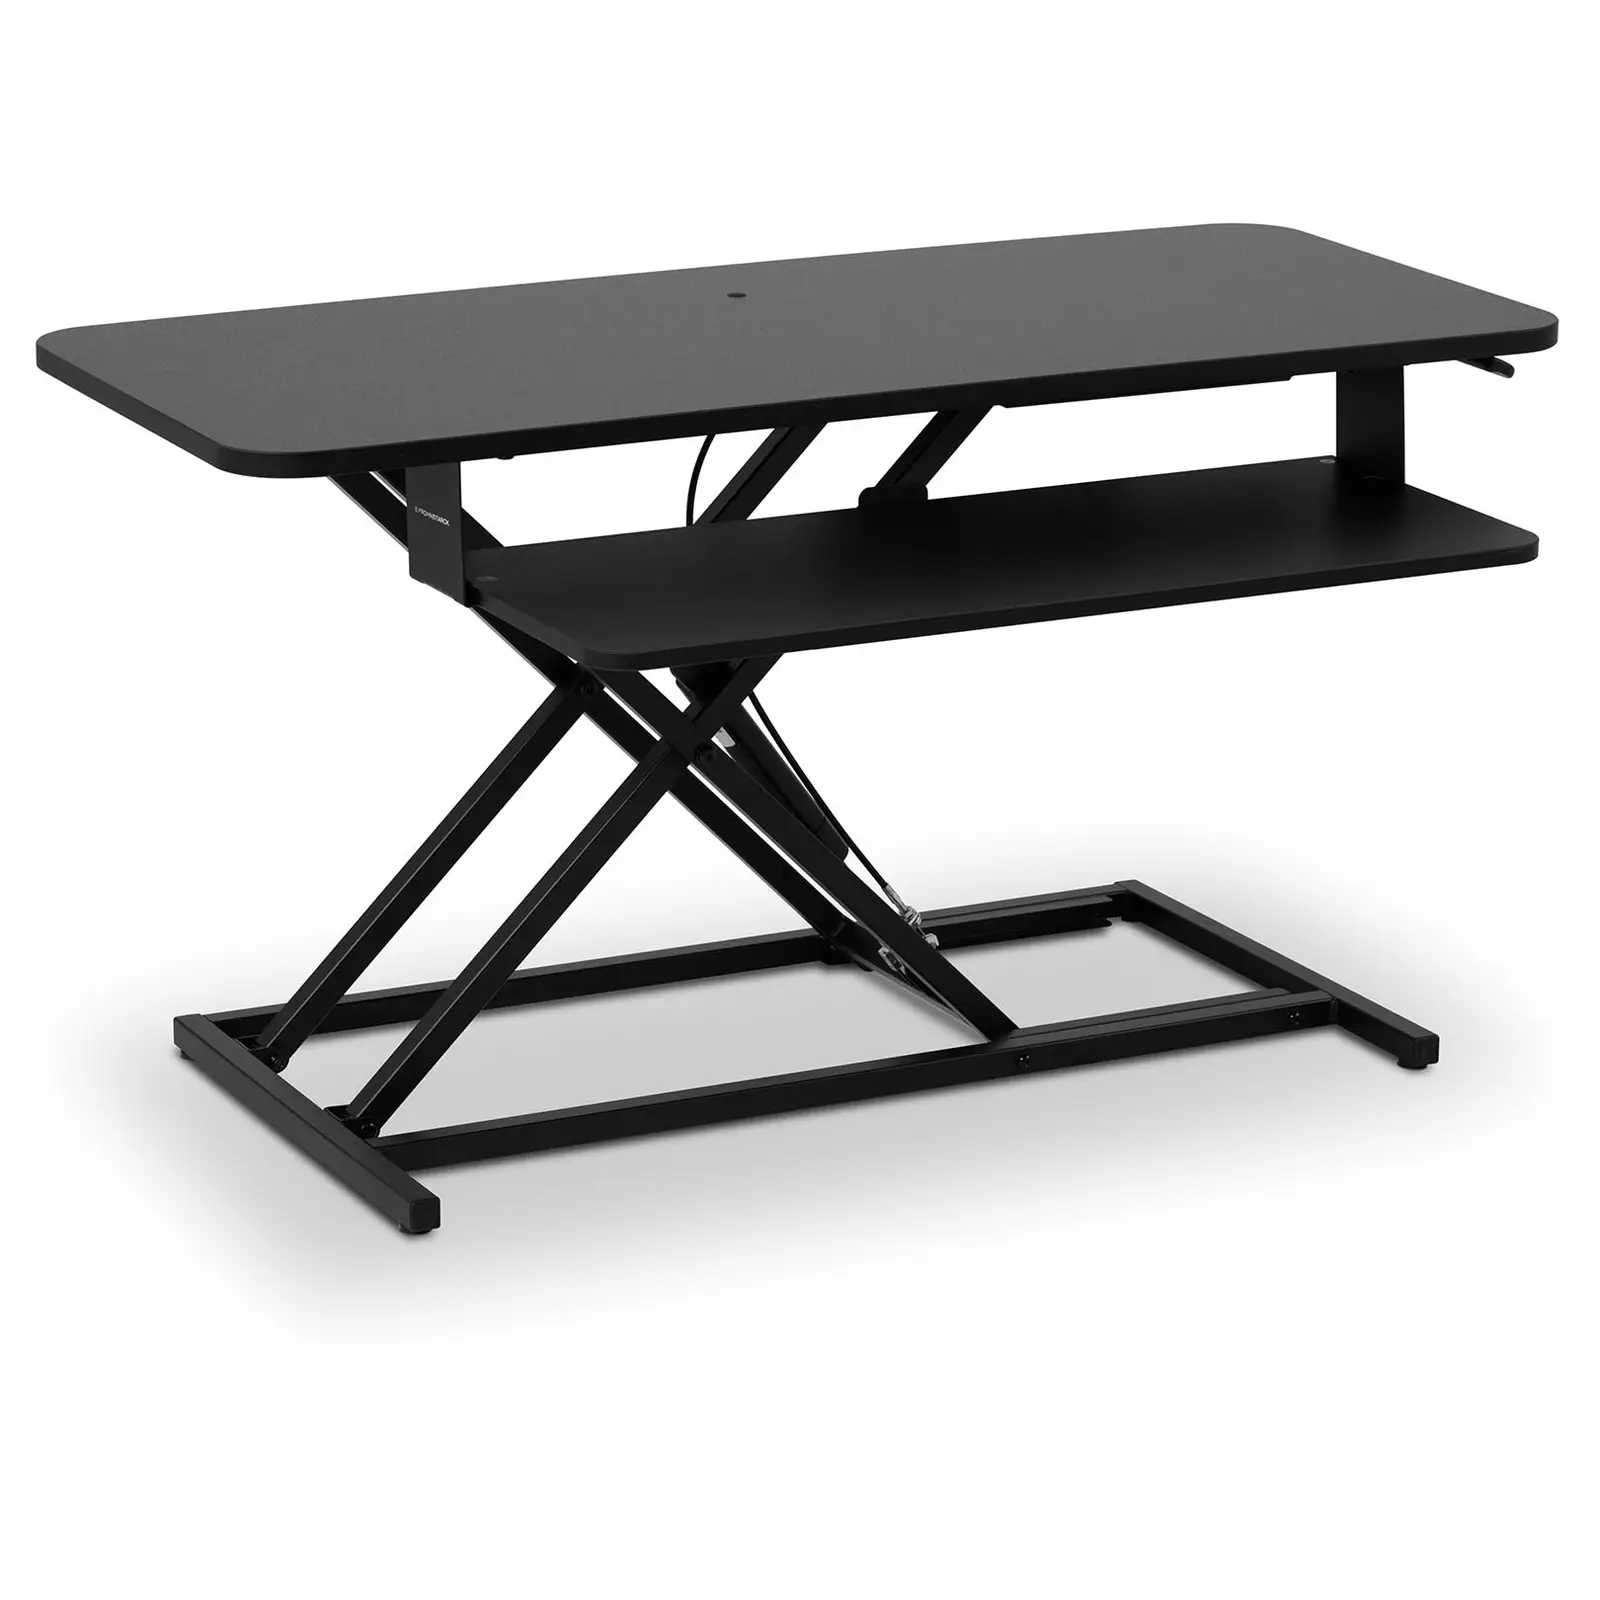 sit-stand desk - sit-stand riser - height adjustable 115 - 500 mm